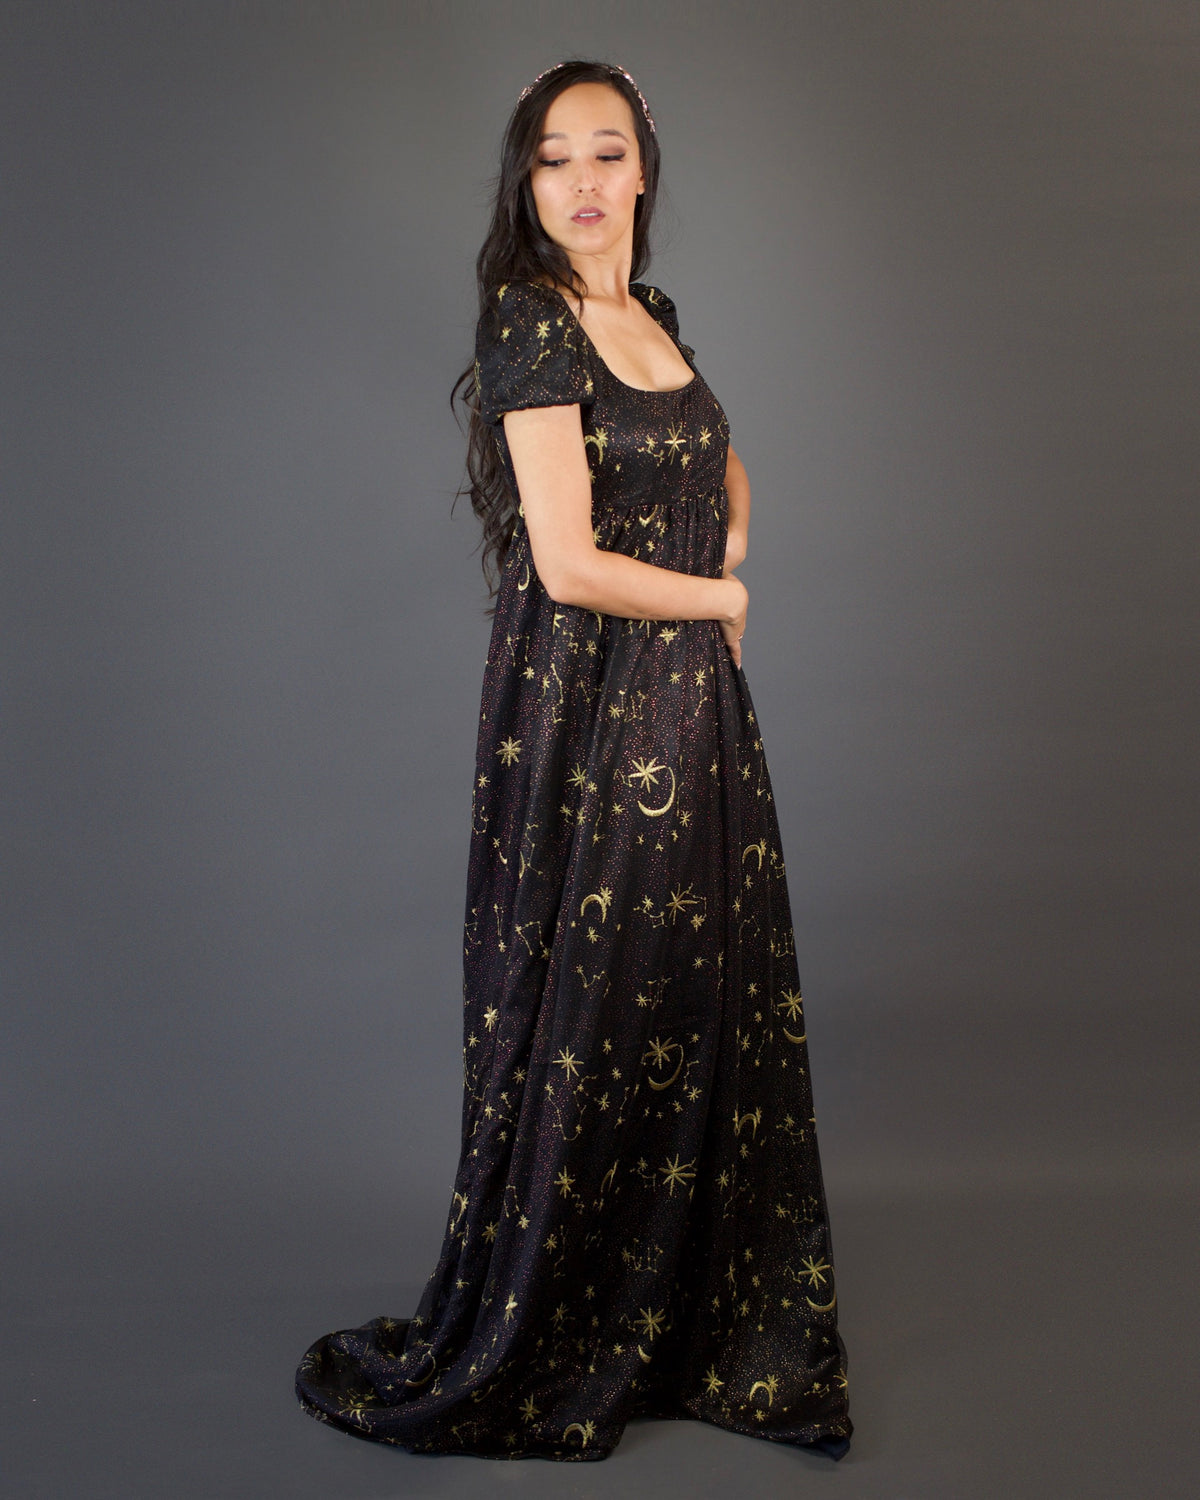 Promenade Amongst the Stars Gown